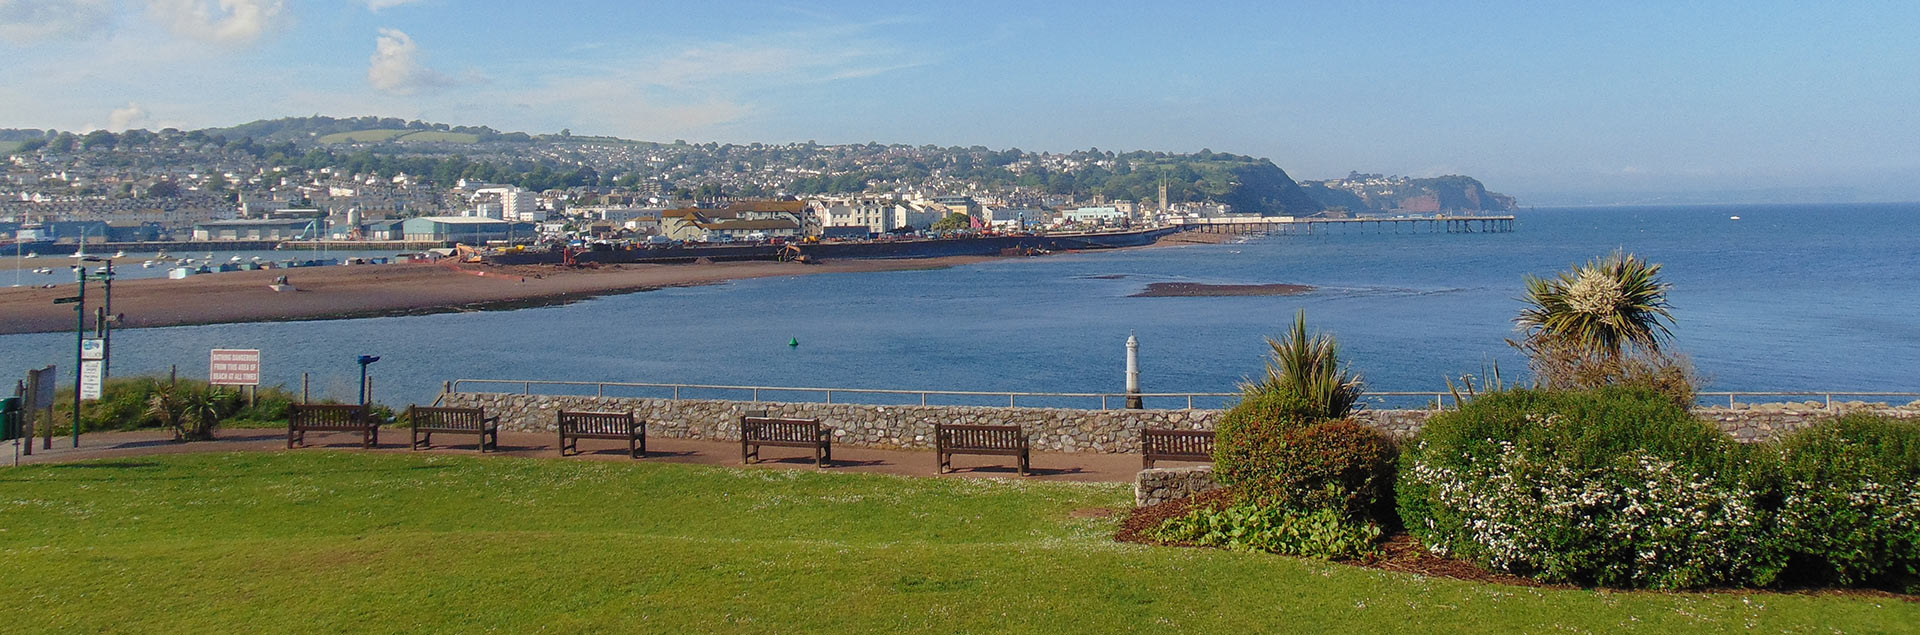 Things to do in Shaldon